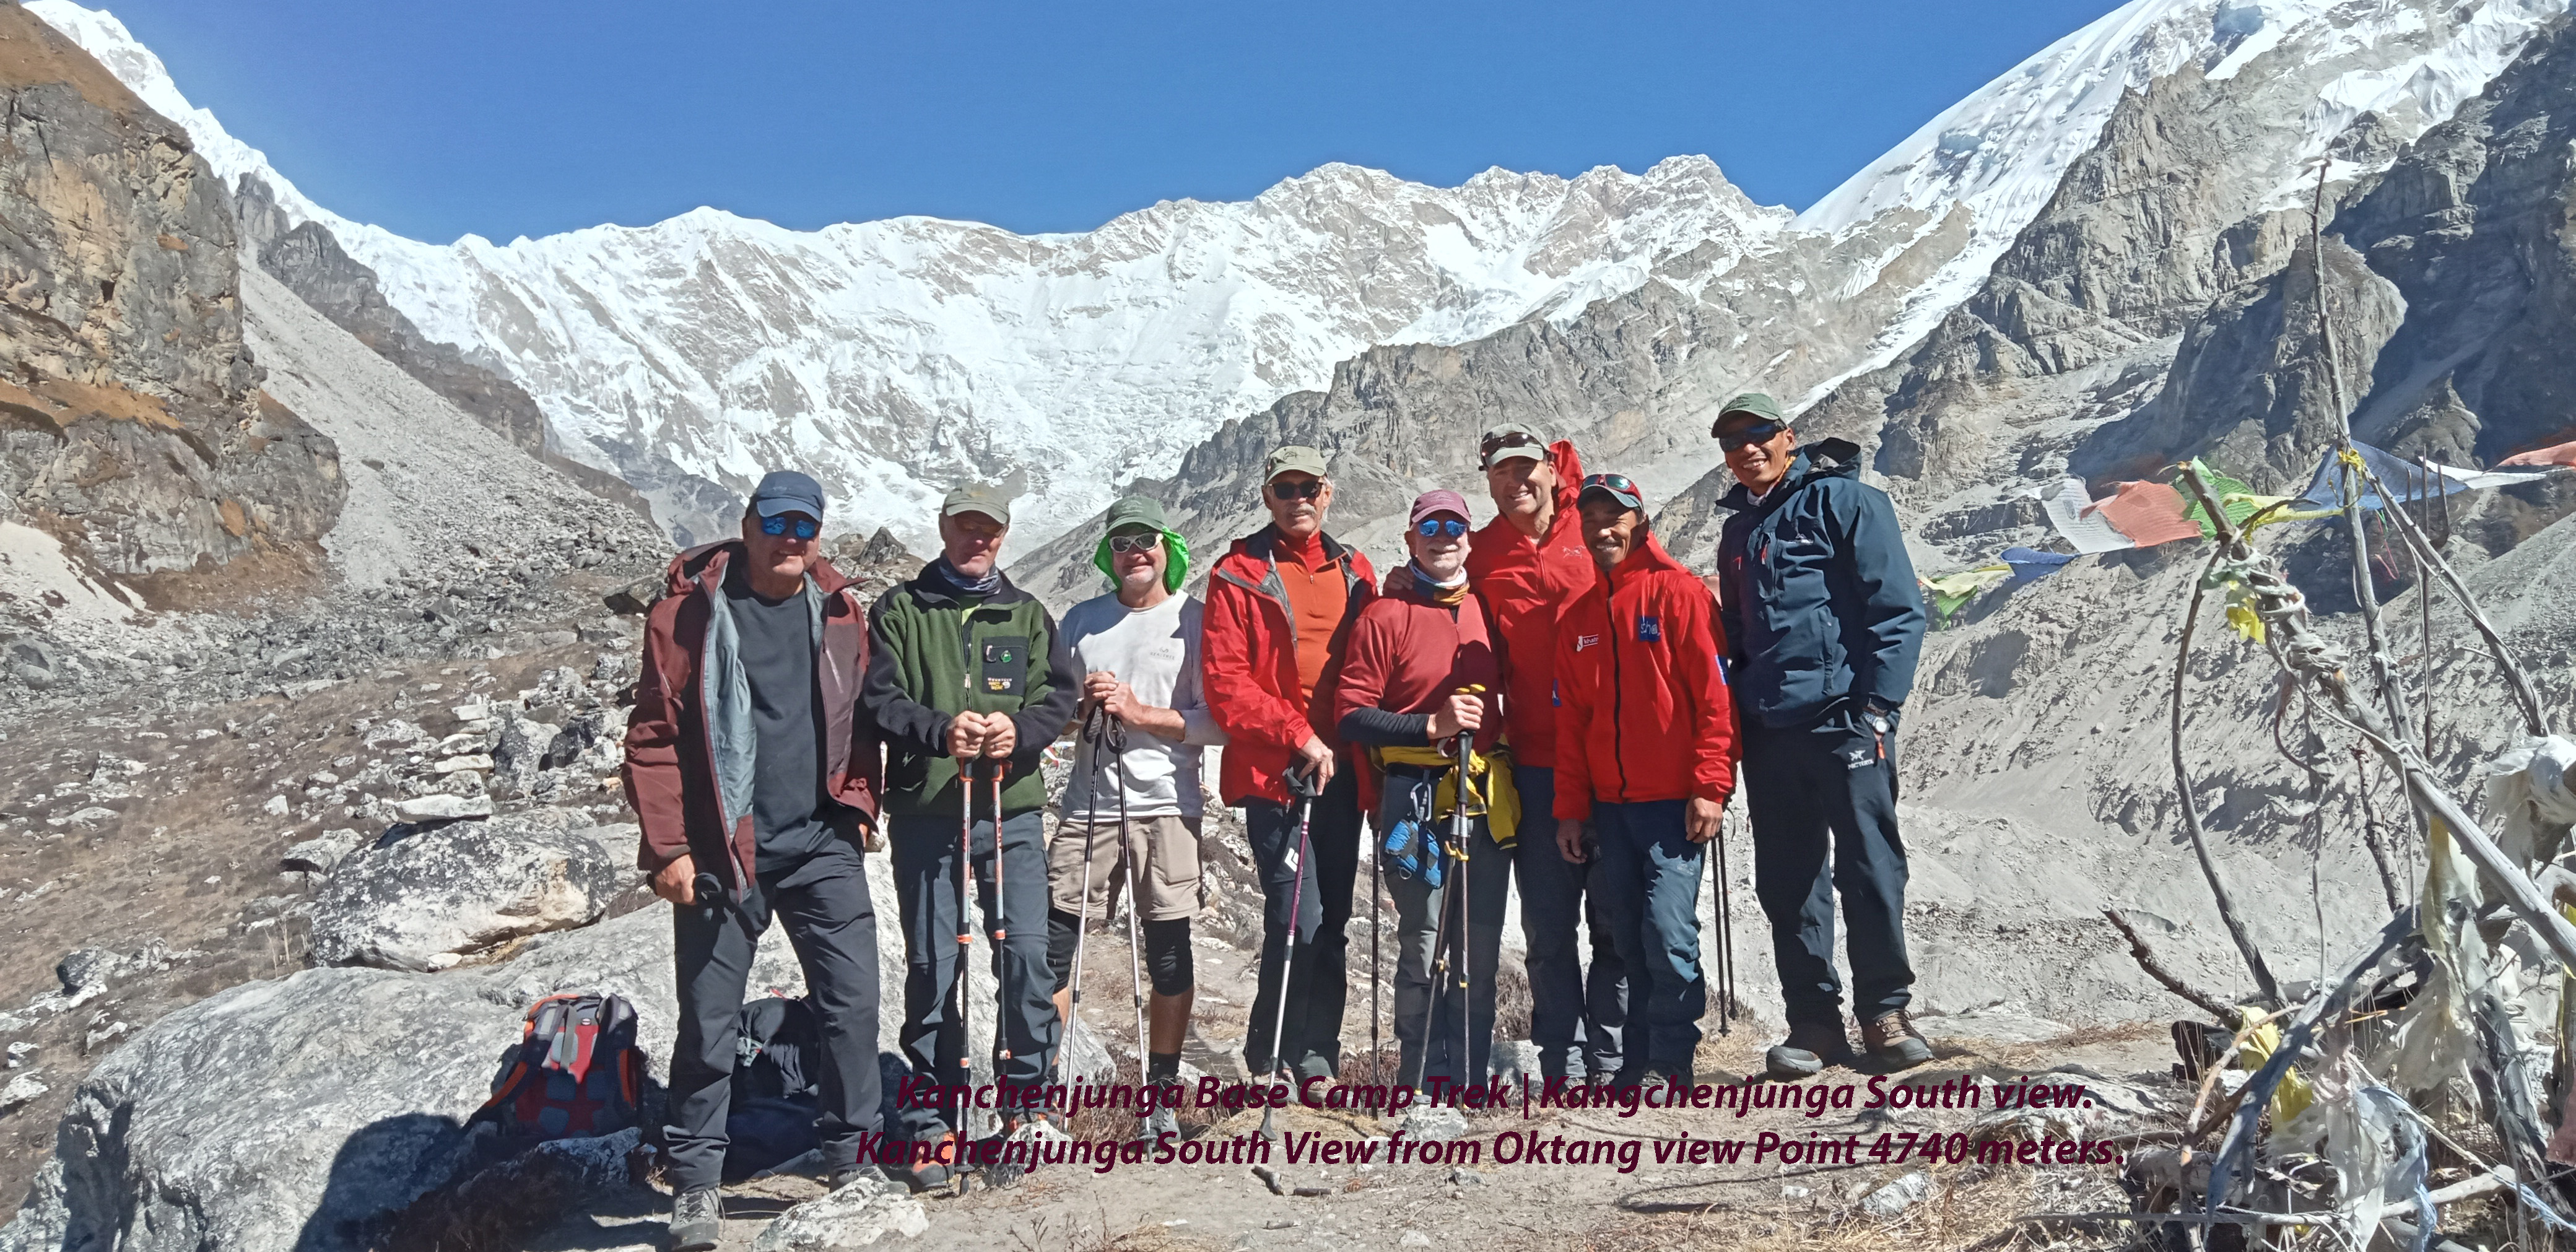 Group Photo at Oktang View Point and  Mount Kanchenjunga South View Backgroung